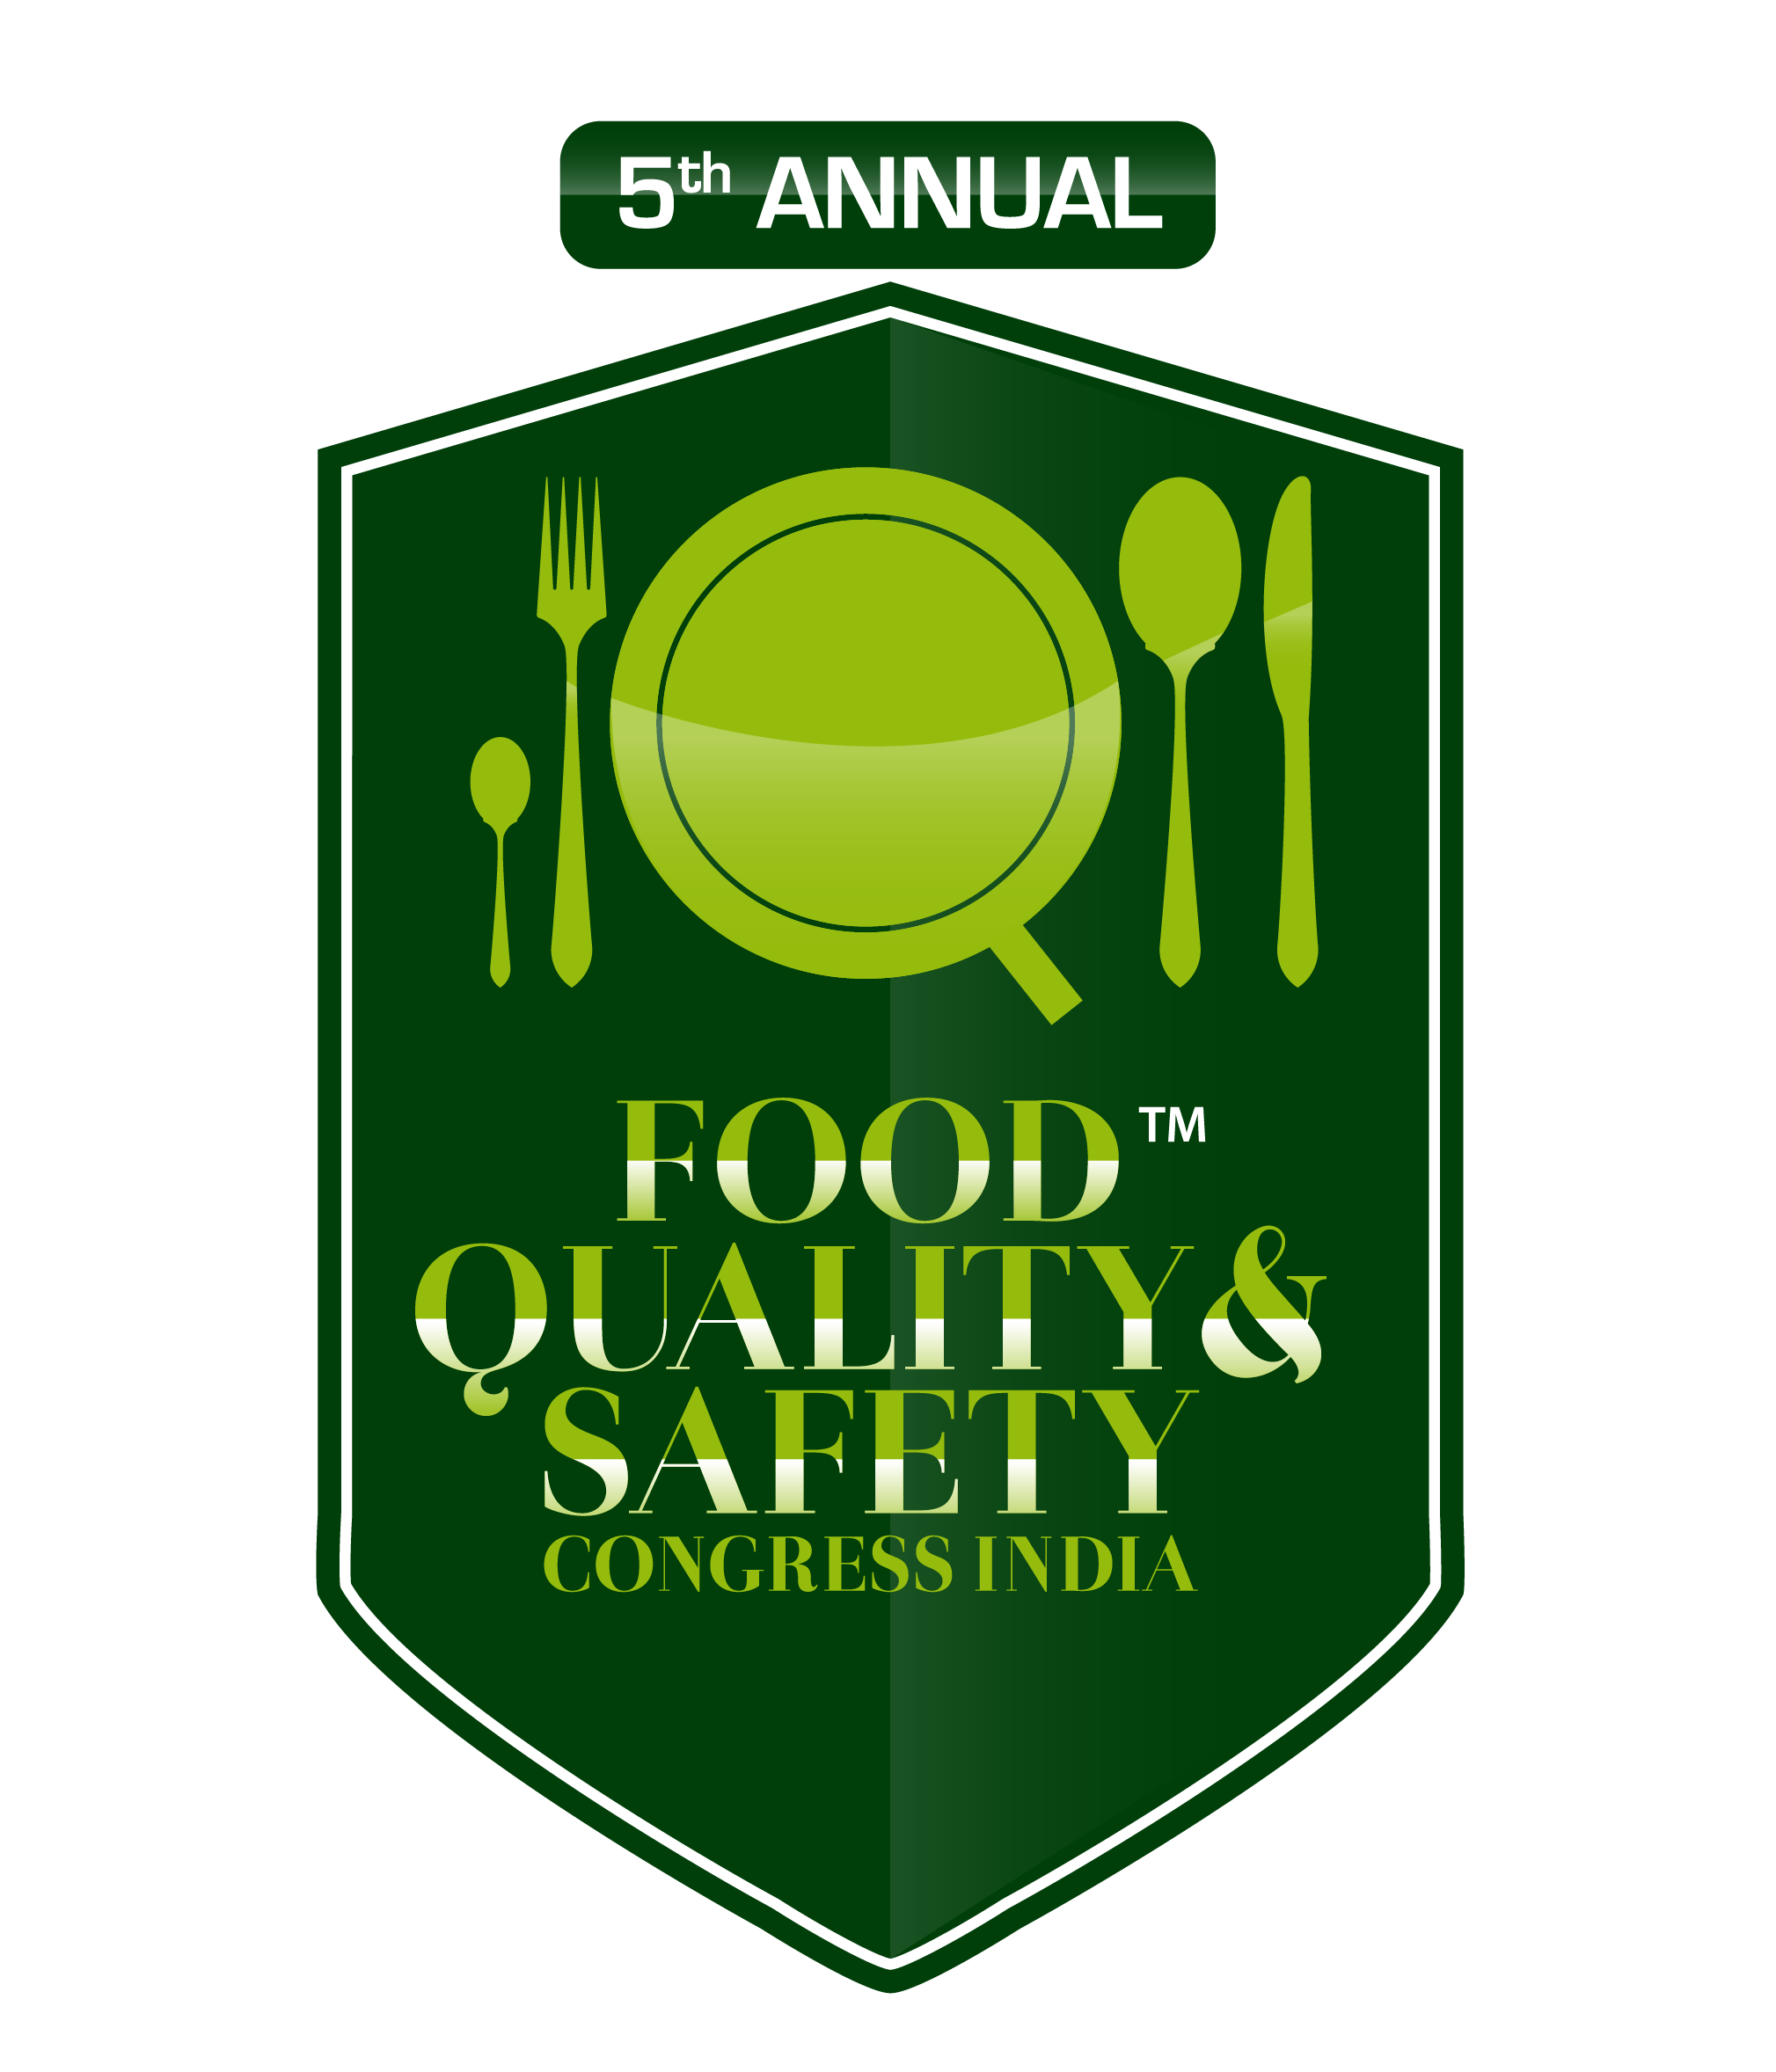 5th Annual Food Quality and Safety Congress India 2018, New Delhi, Delhi, India